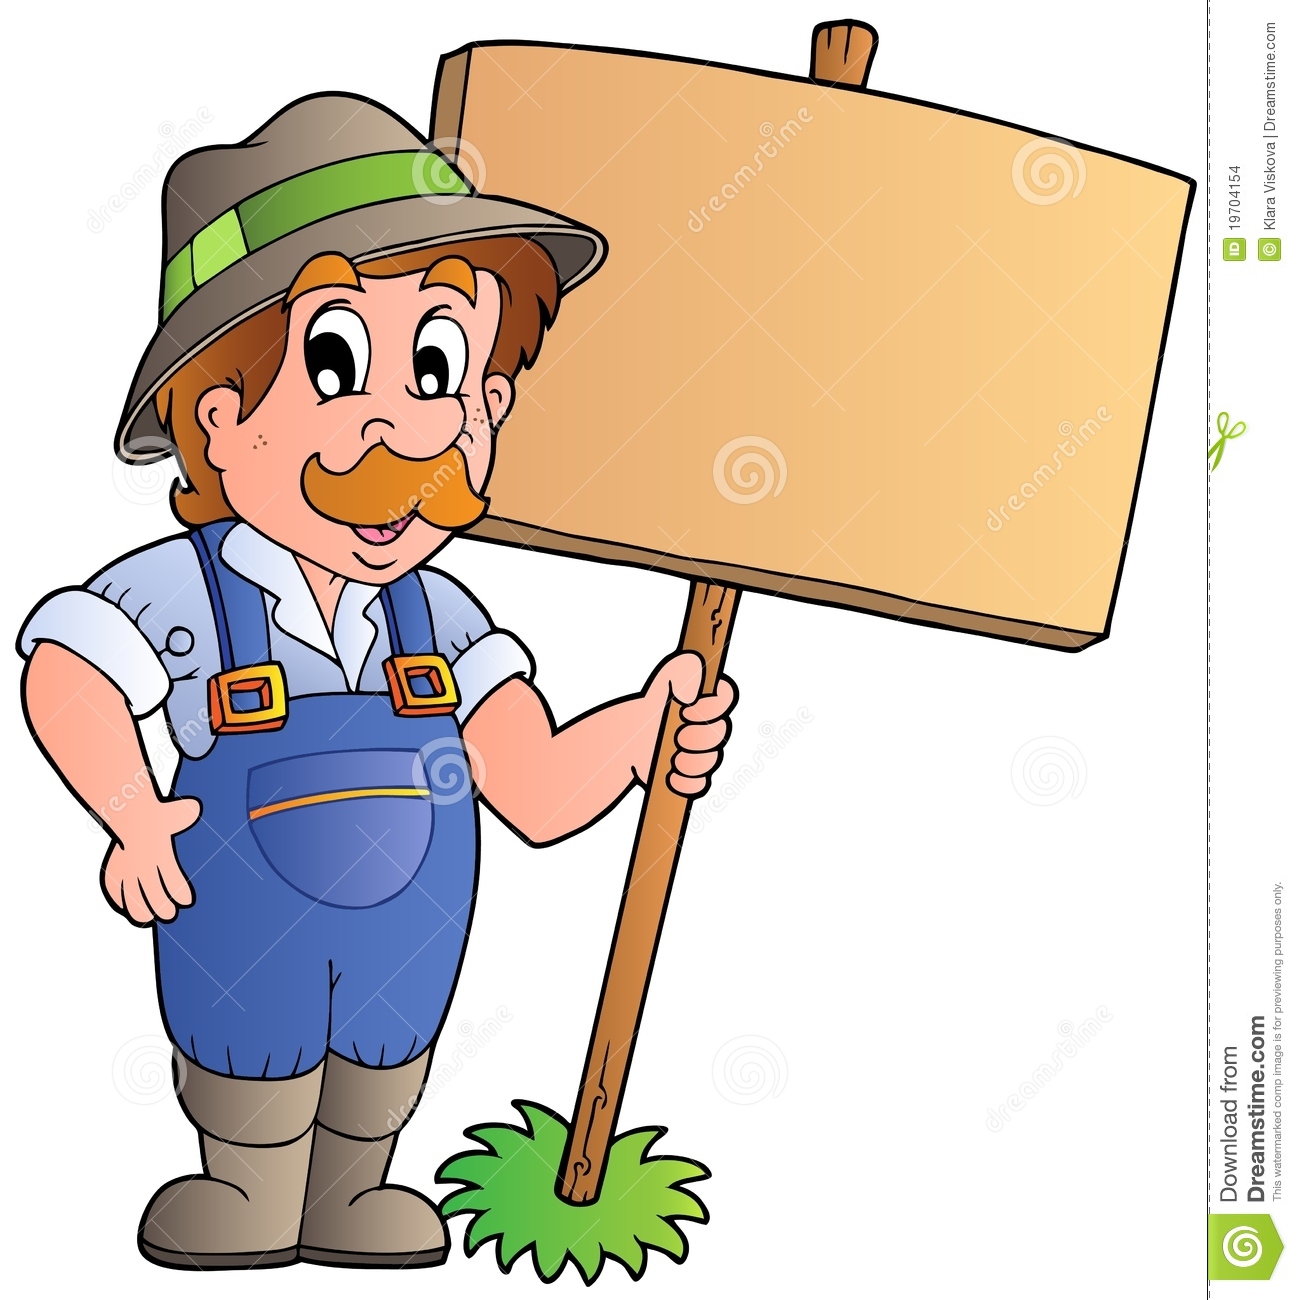 Cartoon Farmer Holding Wooden Board Stock Images   Image  19704154